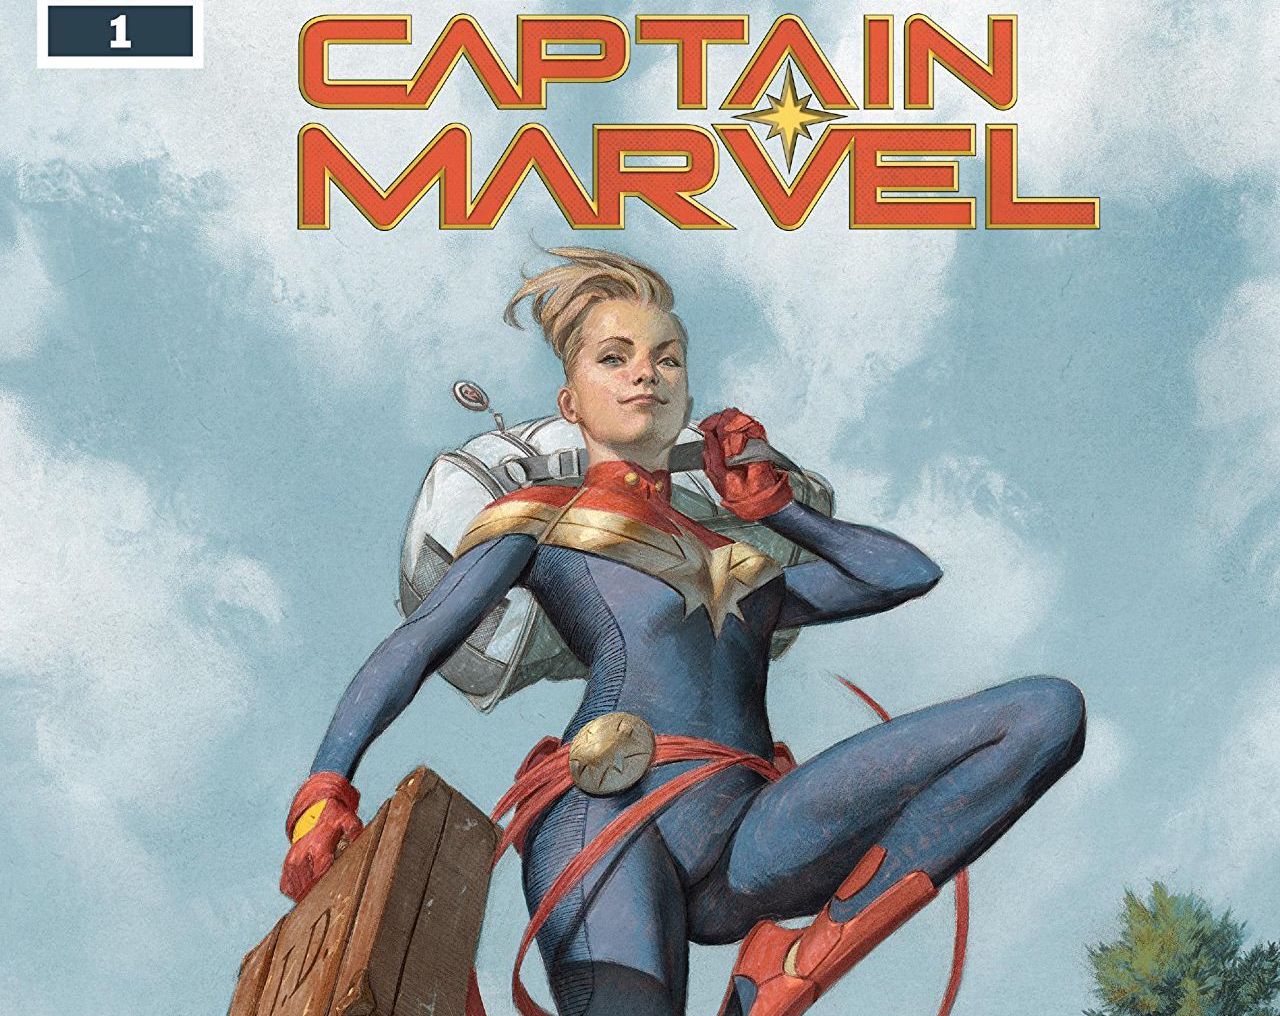 The Life Of Captain Marvel #1 Review